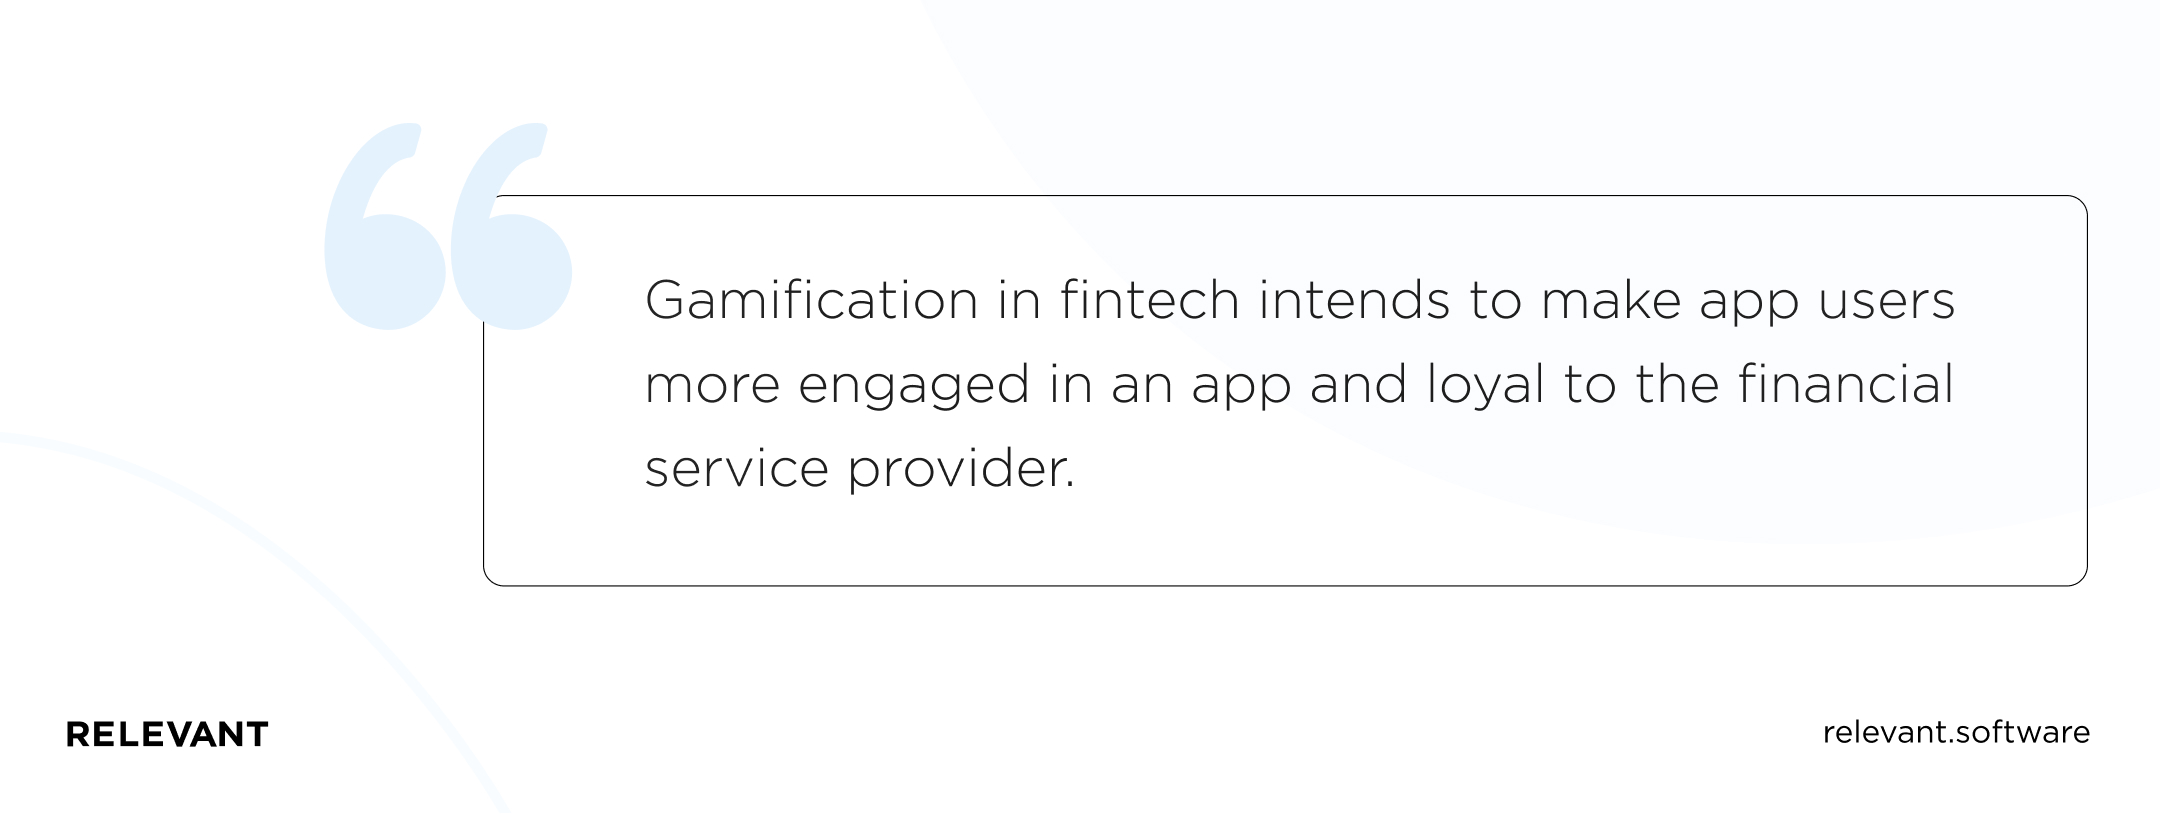 gamification in fintech intends to make app users more engaged in an app and loyal to the financial service provider